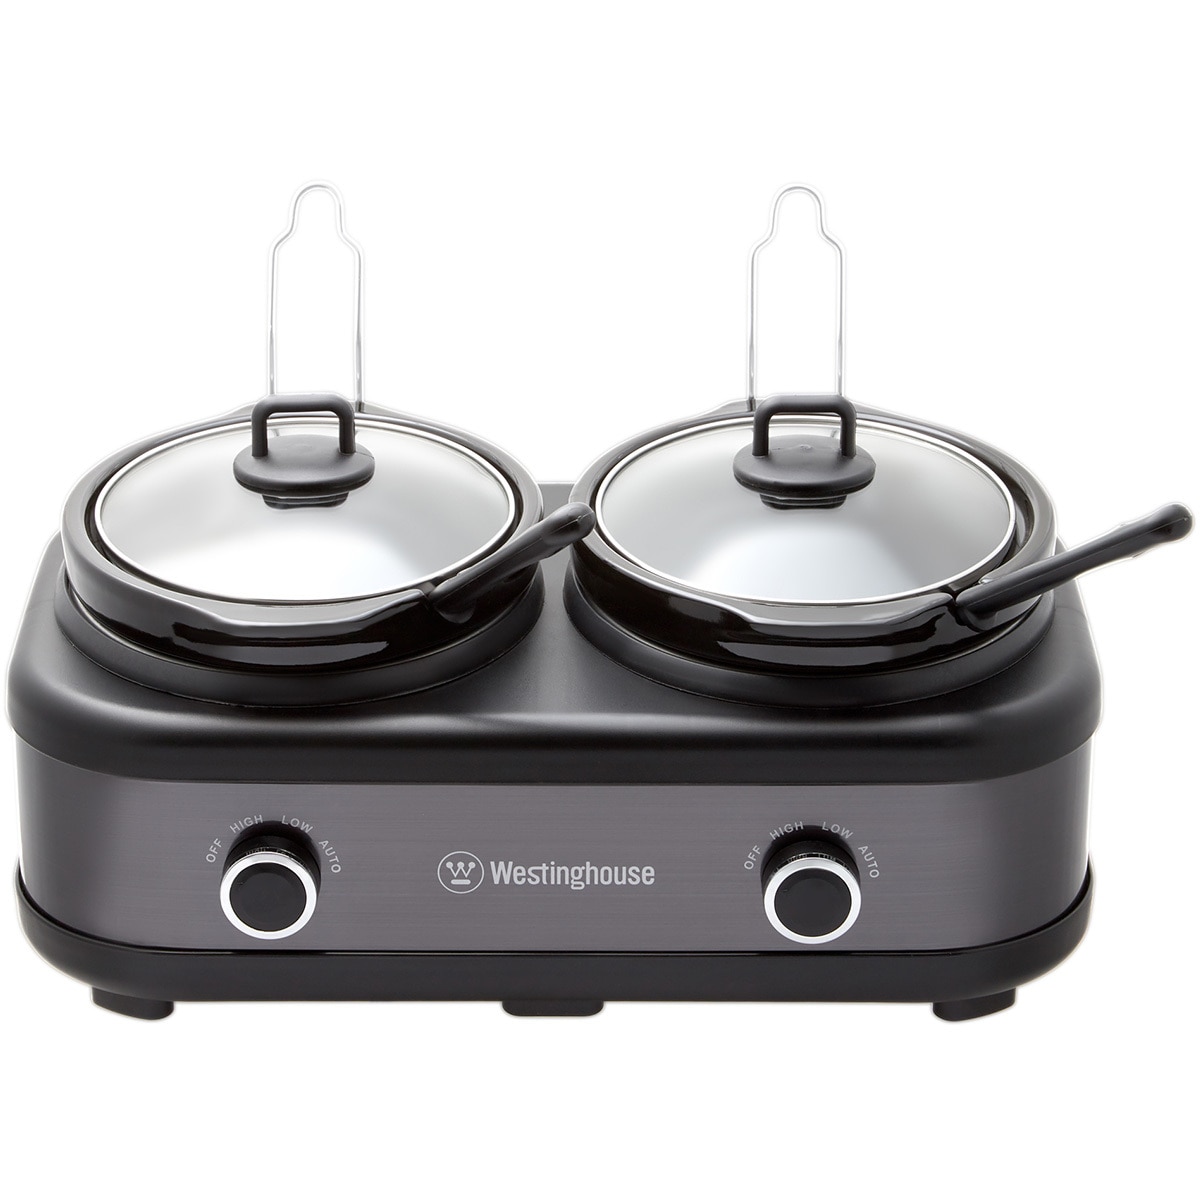 Westinghouse 2 X 2.5L Pot Slow Cooker, Black Stainless with Auto Function